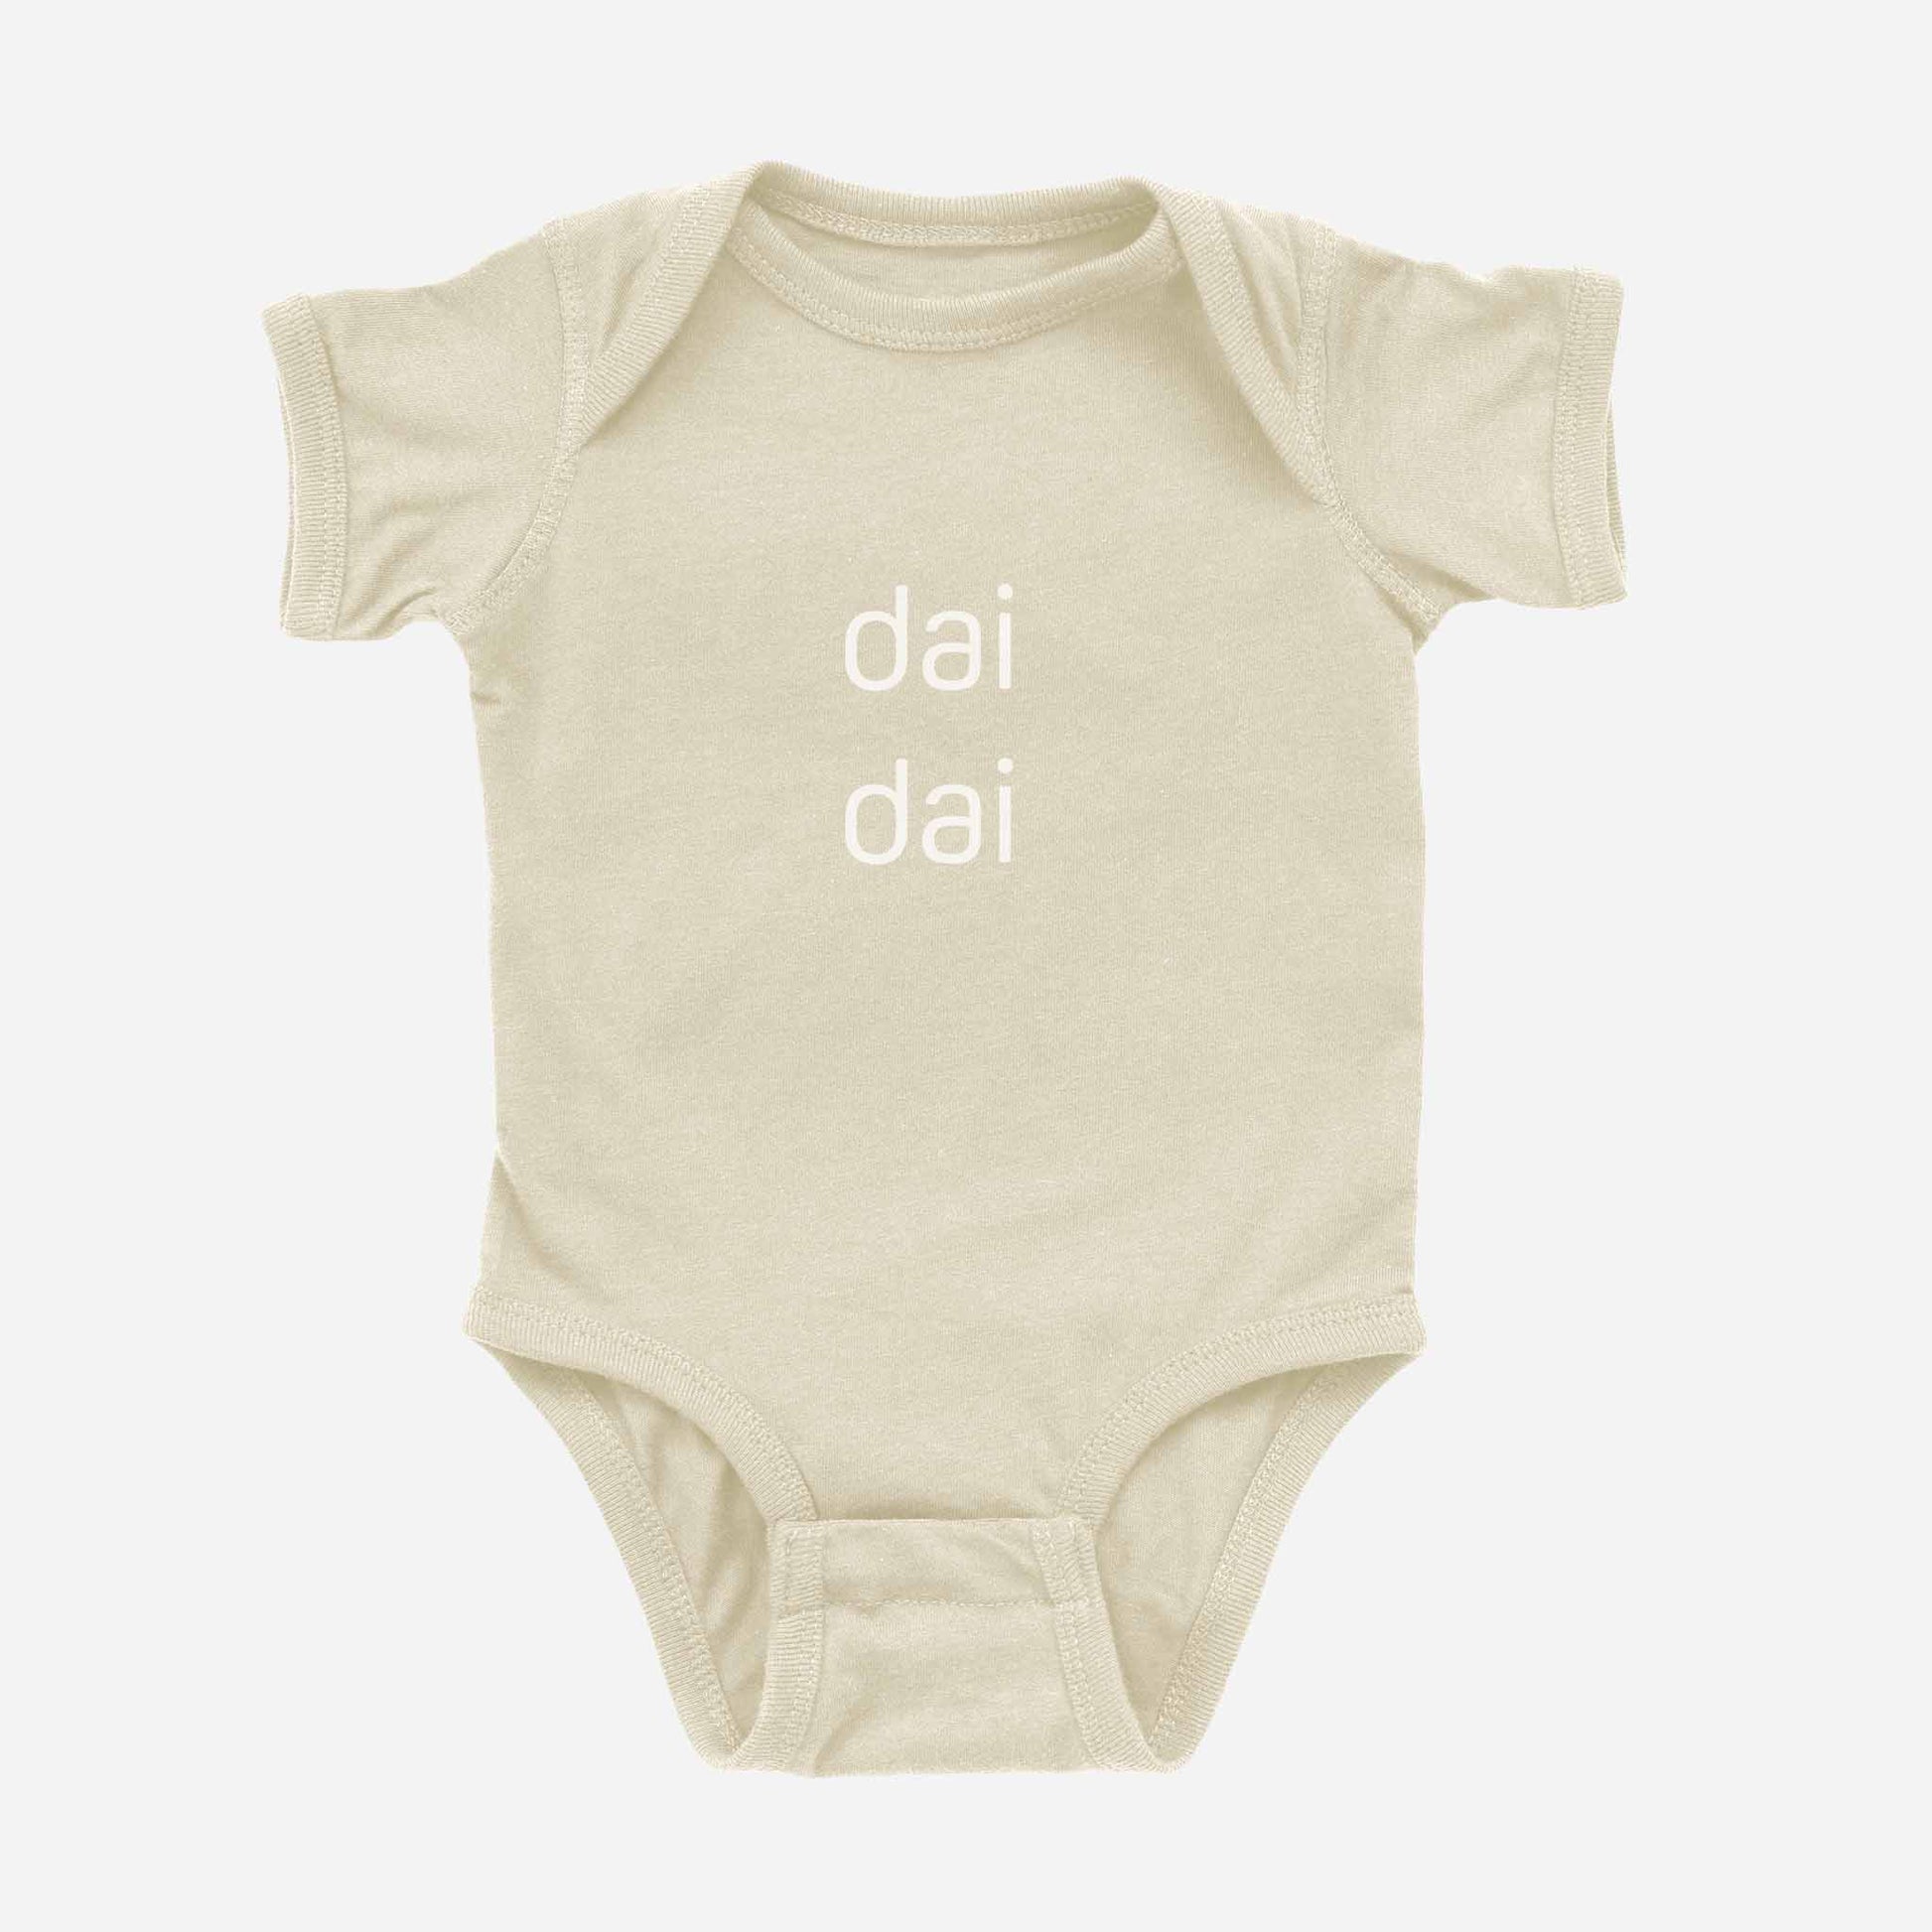 dai dai little brother chinese cantonese Onesie Natural front - Asian Baby Clothing